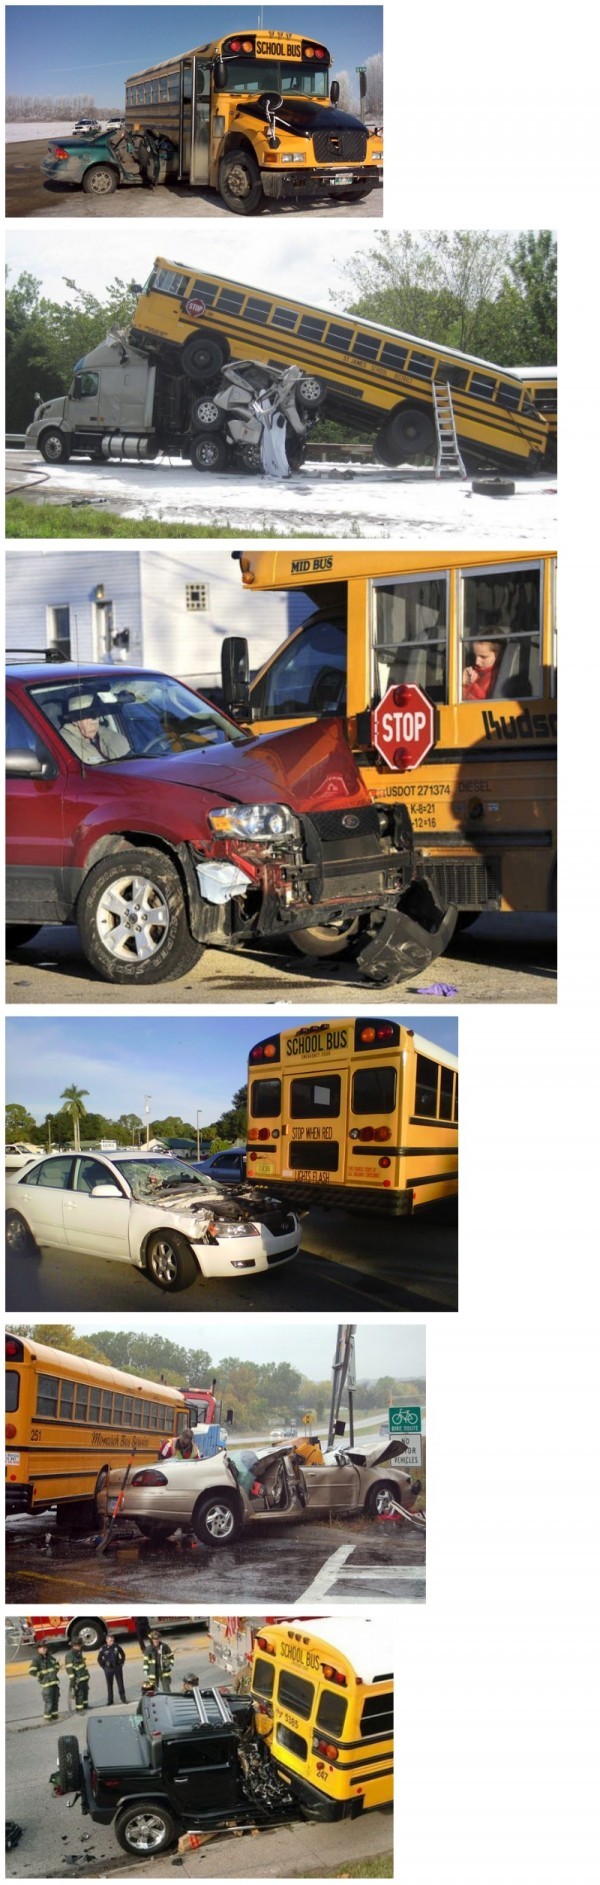 Don't mess with the school bus - Crash, Road accident, School bus, Strong, Longpost